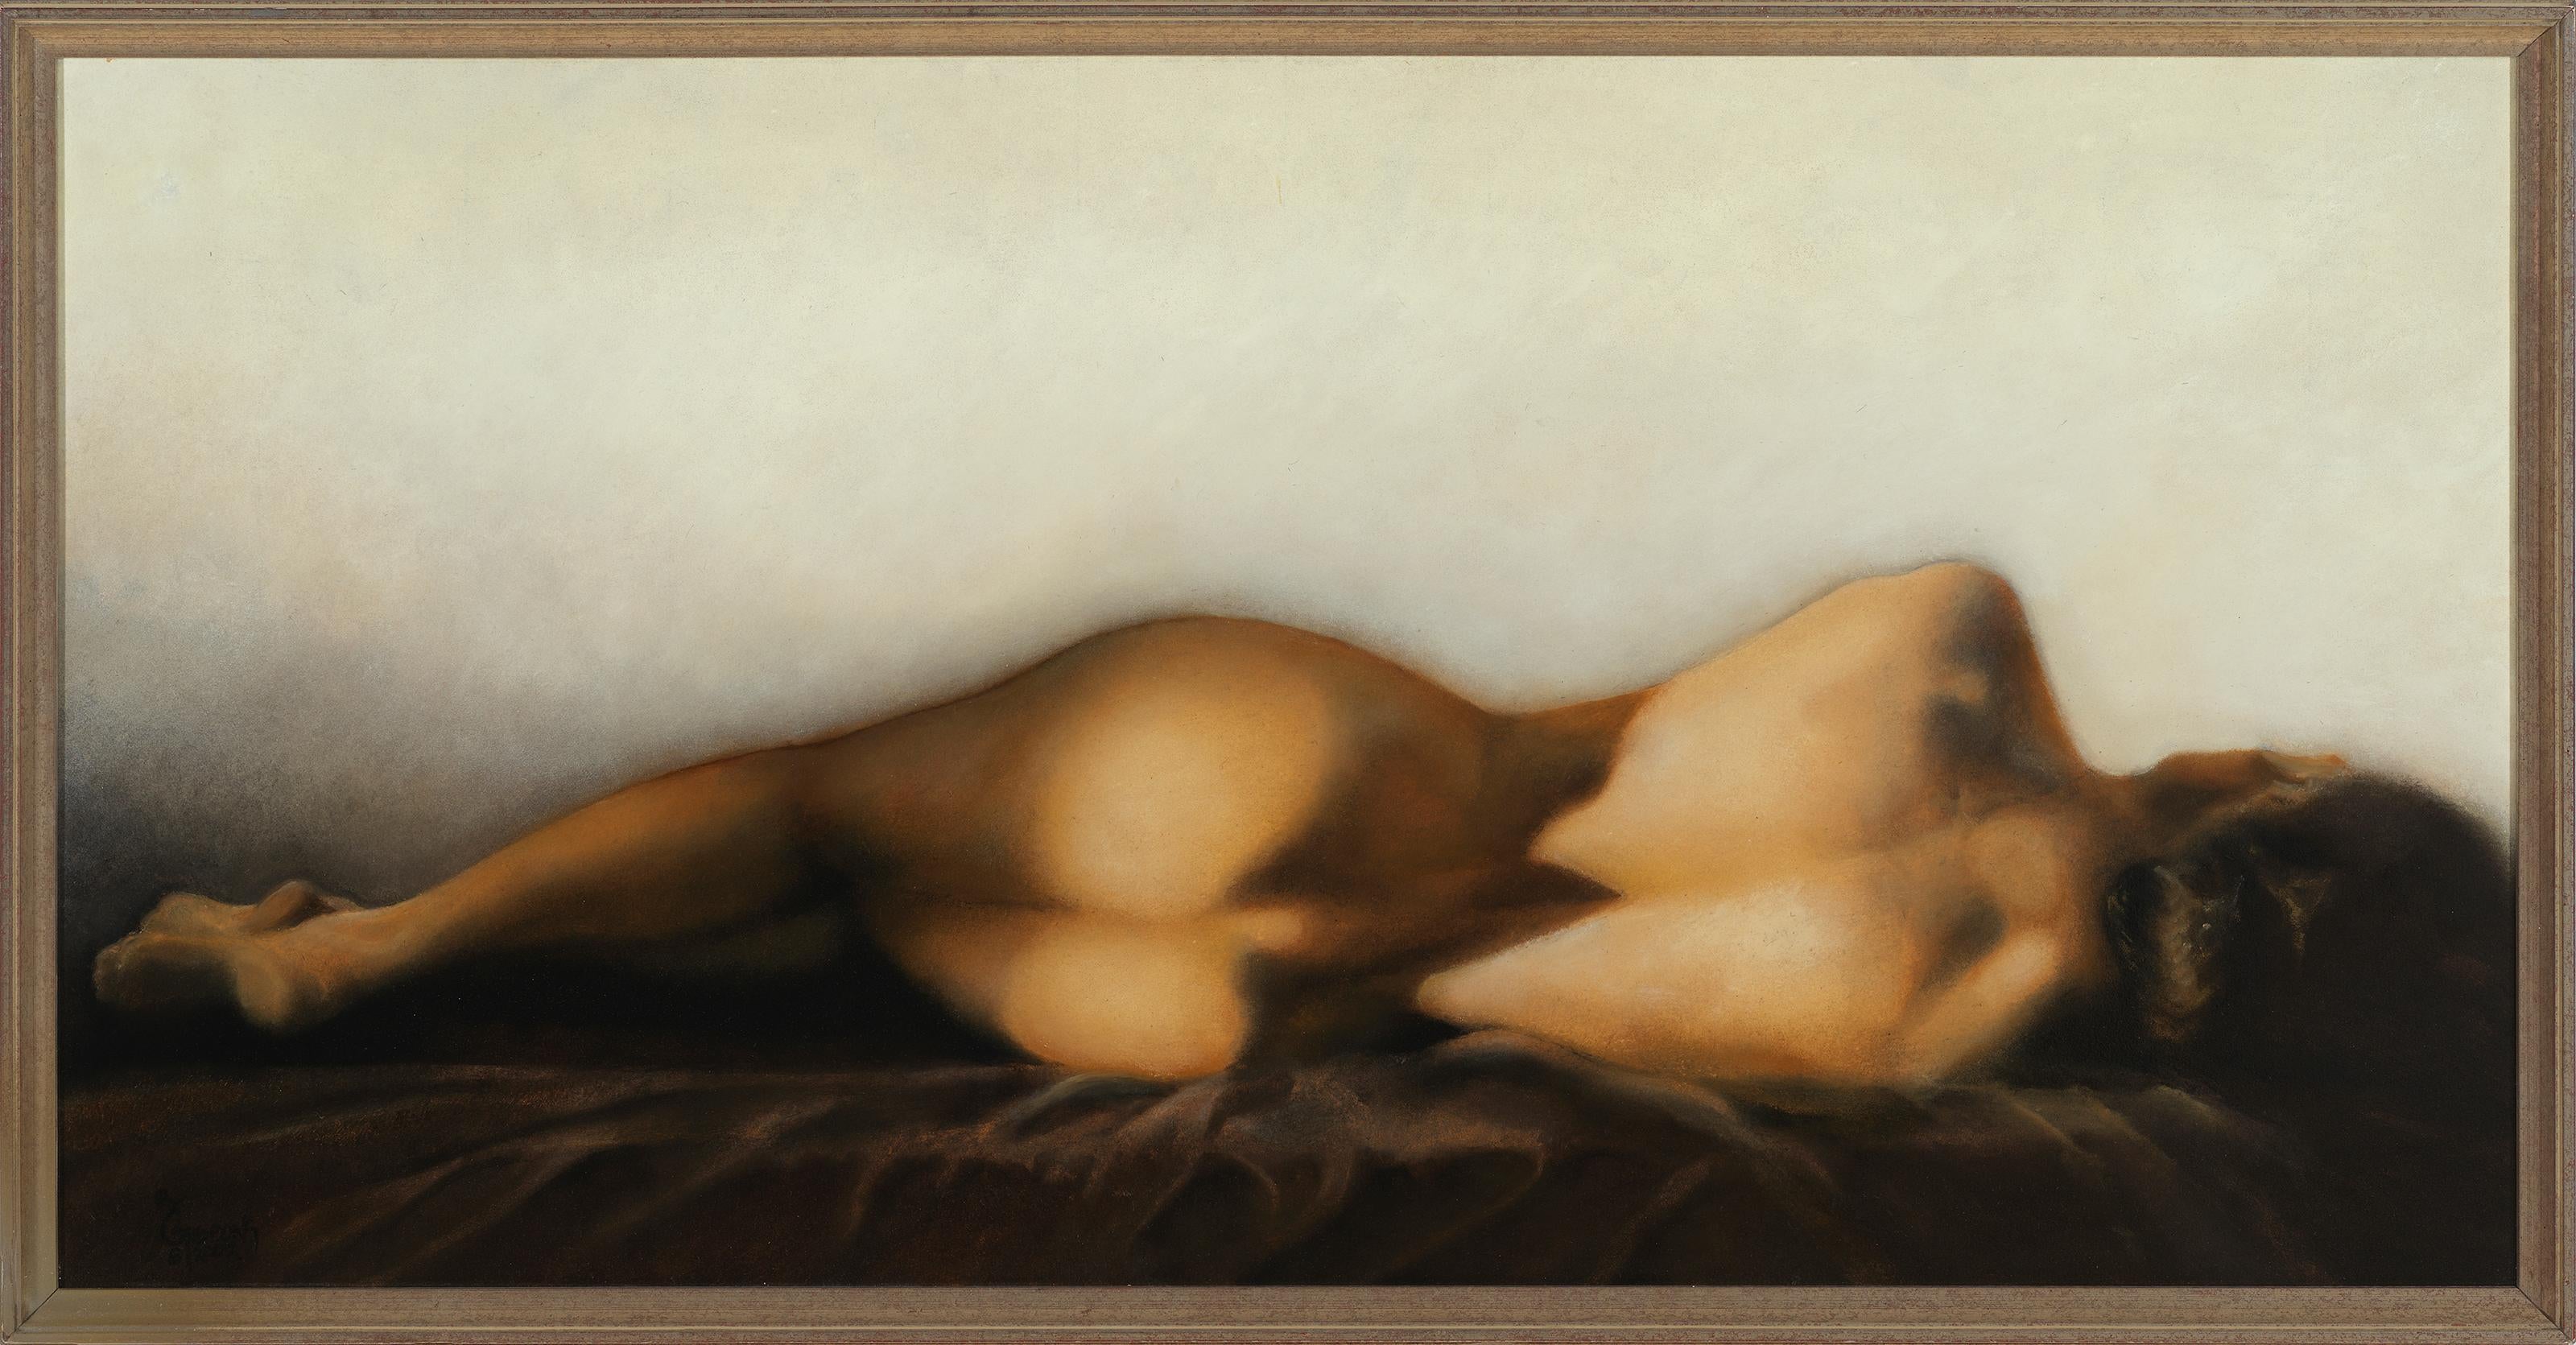 Richard Gibbons Nude Painting - Untitled #173 - Nude Female Figure Lying Down,  Earthy Gold and Neutral Tones